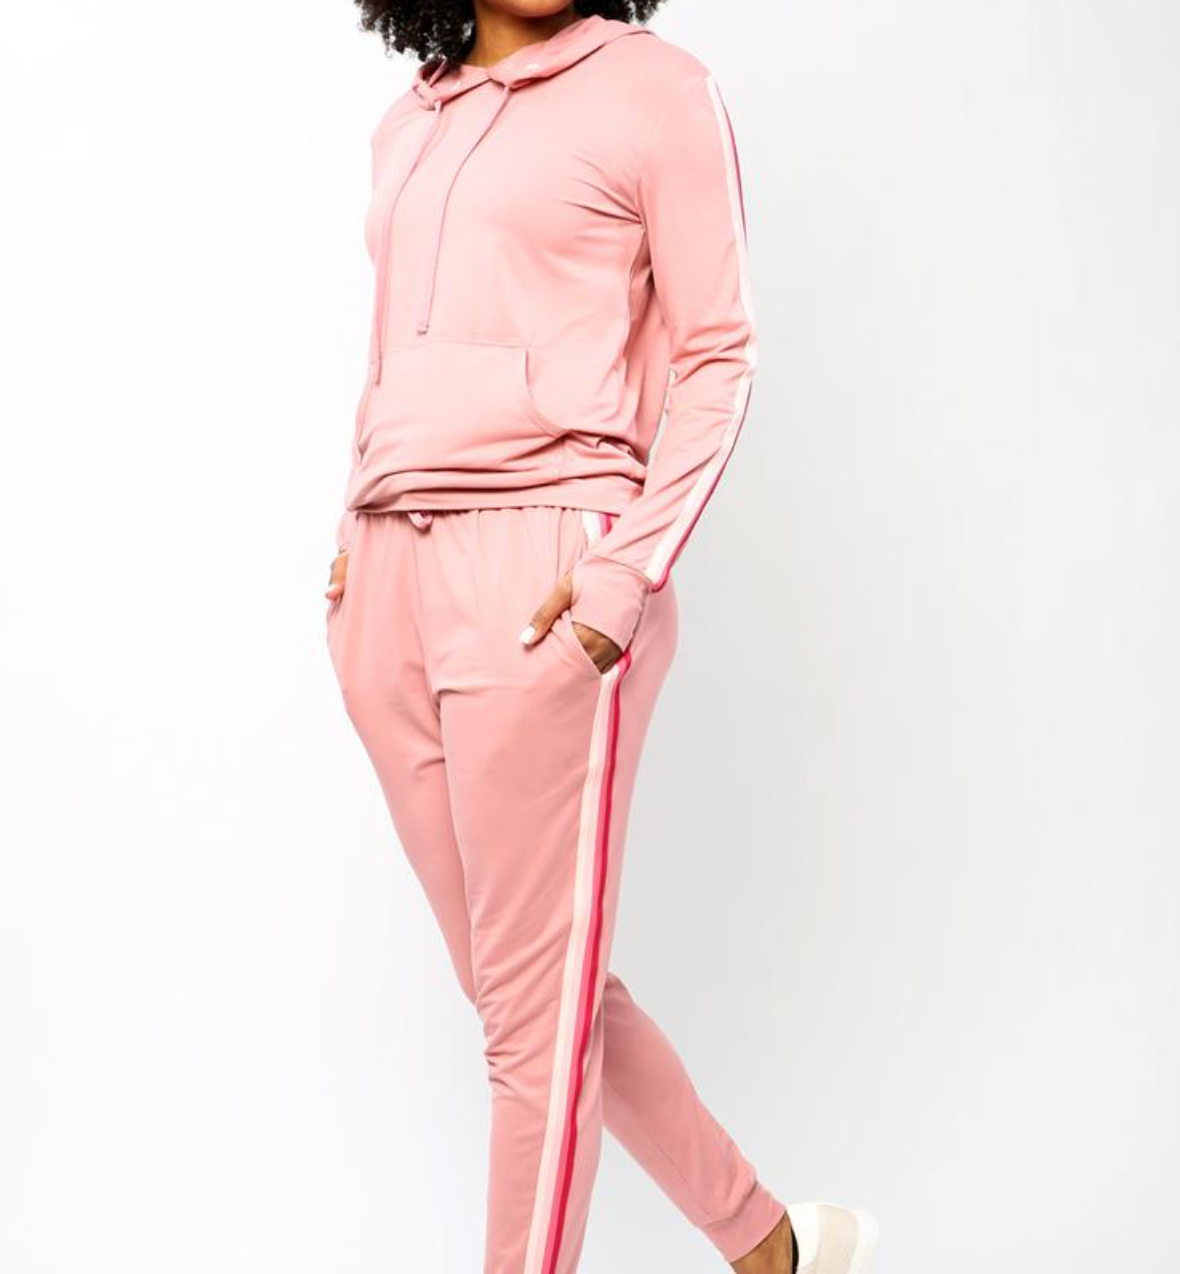 FITKICKS '76 Varsity Joggers- Pink or Gray